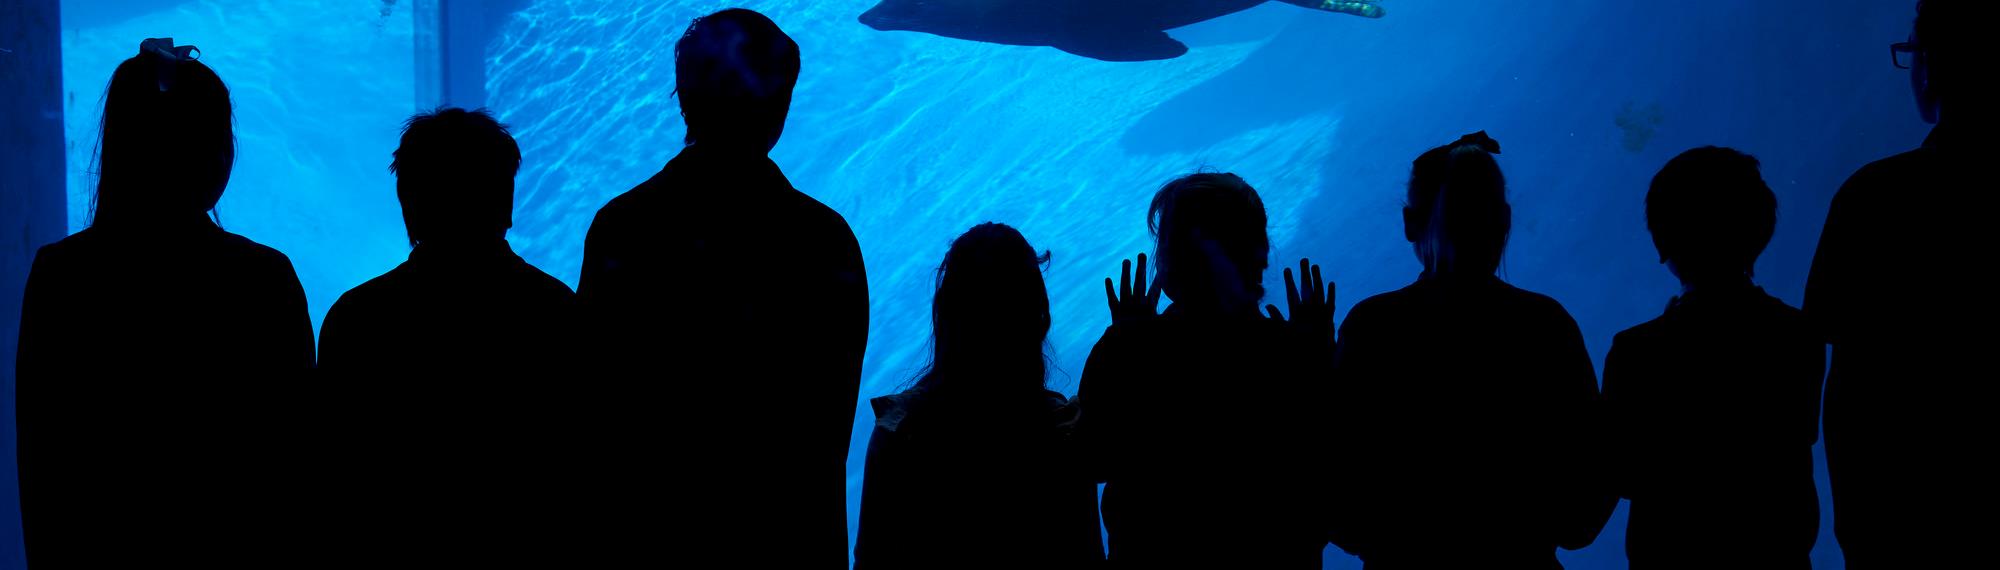 Silhouette of students looking through the under water viewing glass at a seal swimming by.